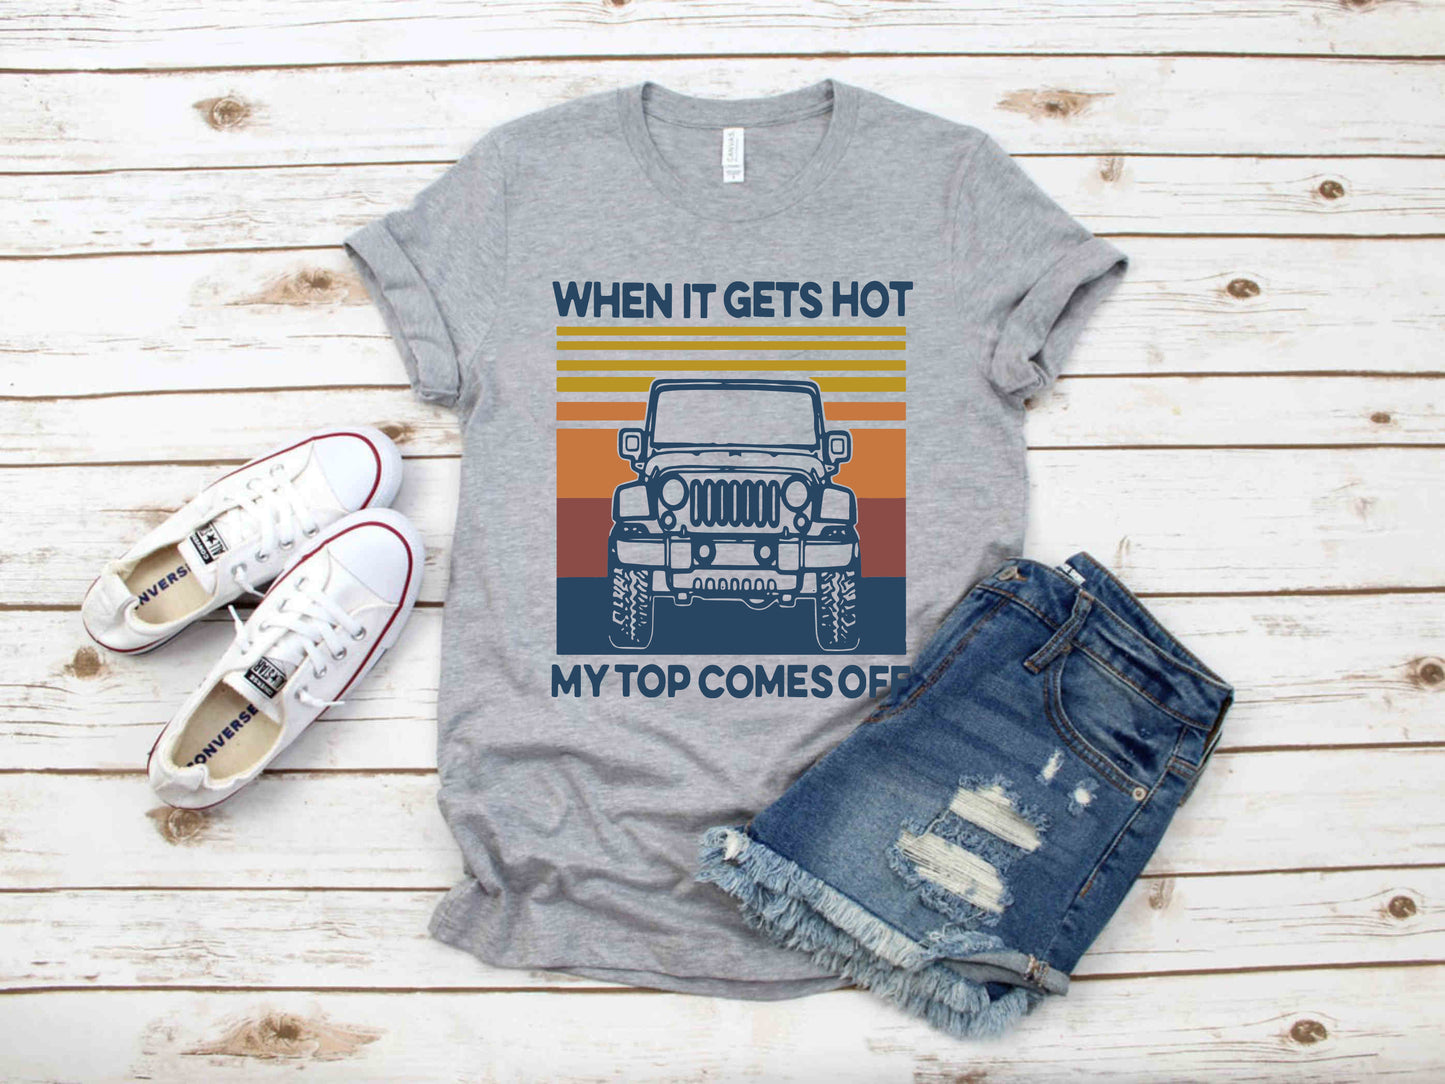 It's Getting Hot . . . Get That Jeep Out Girl!